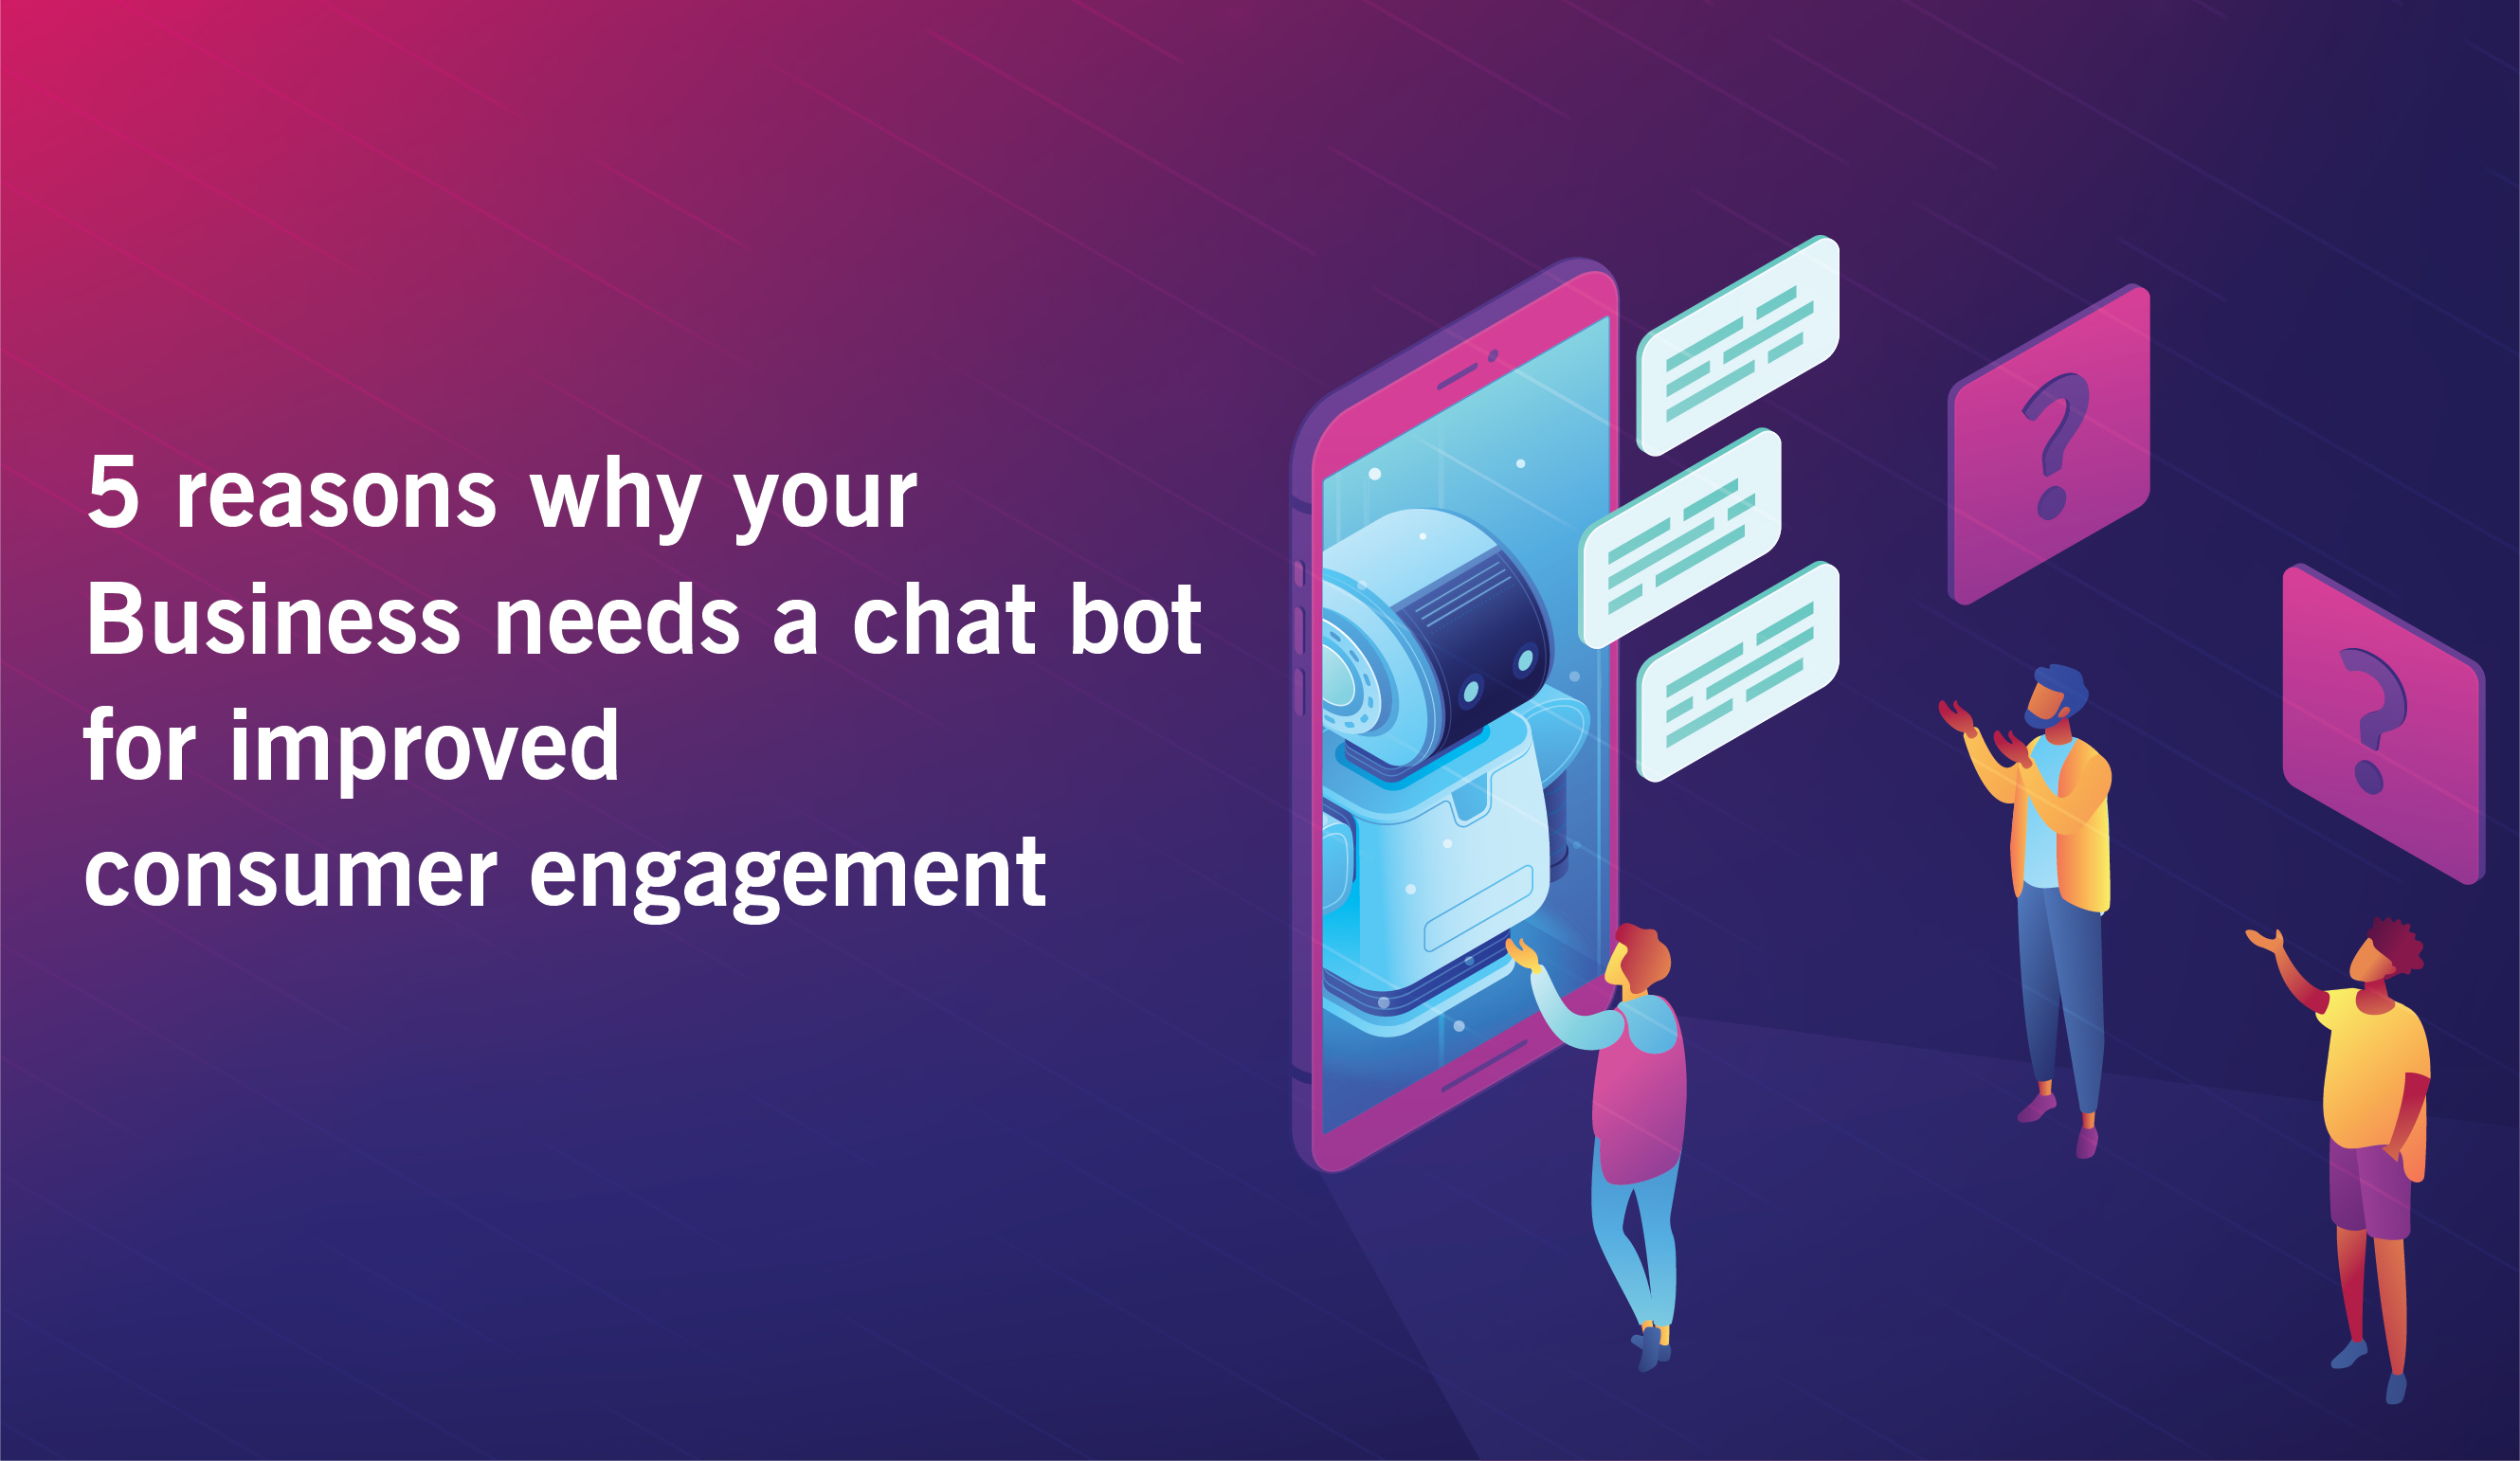 5 reasons why your business needs a chatbot to grow